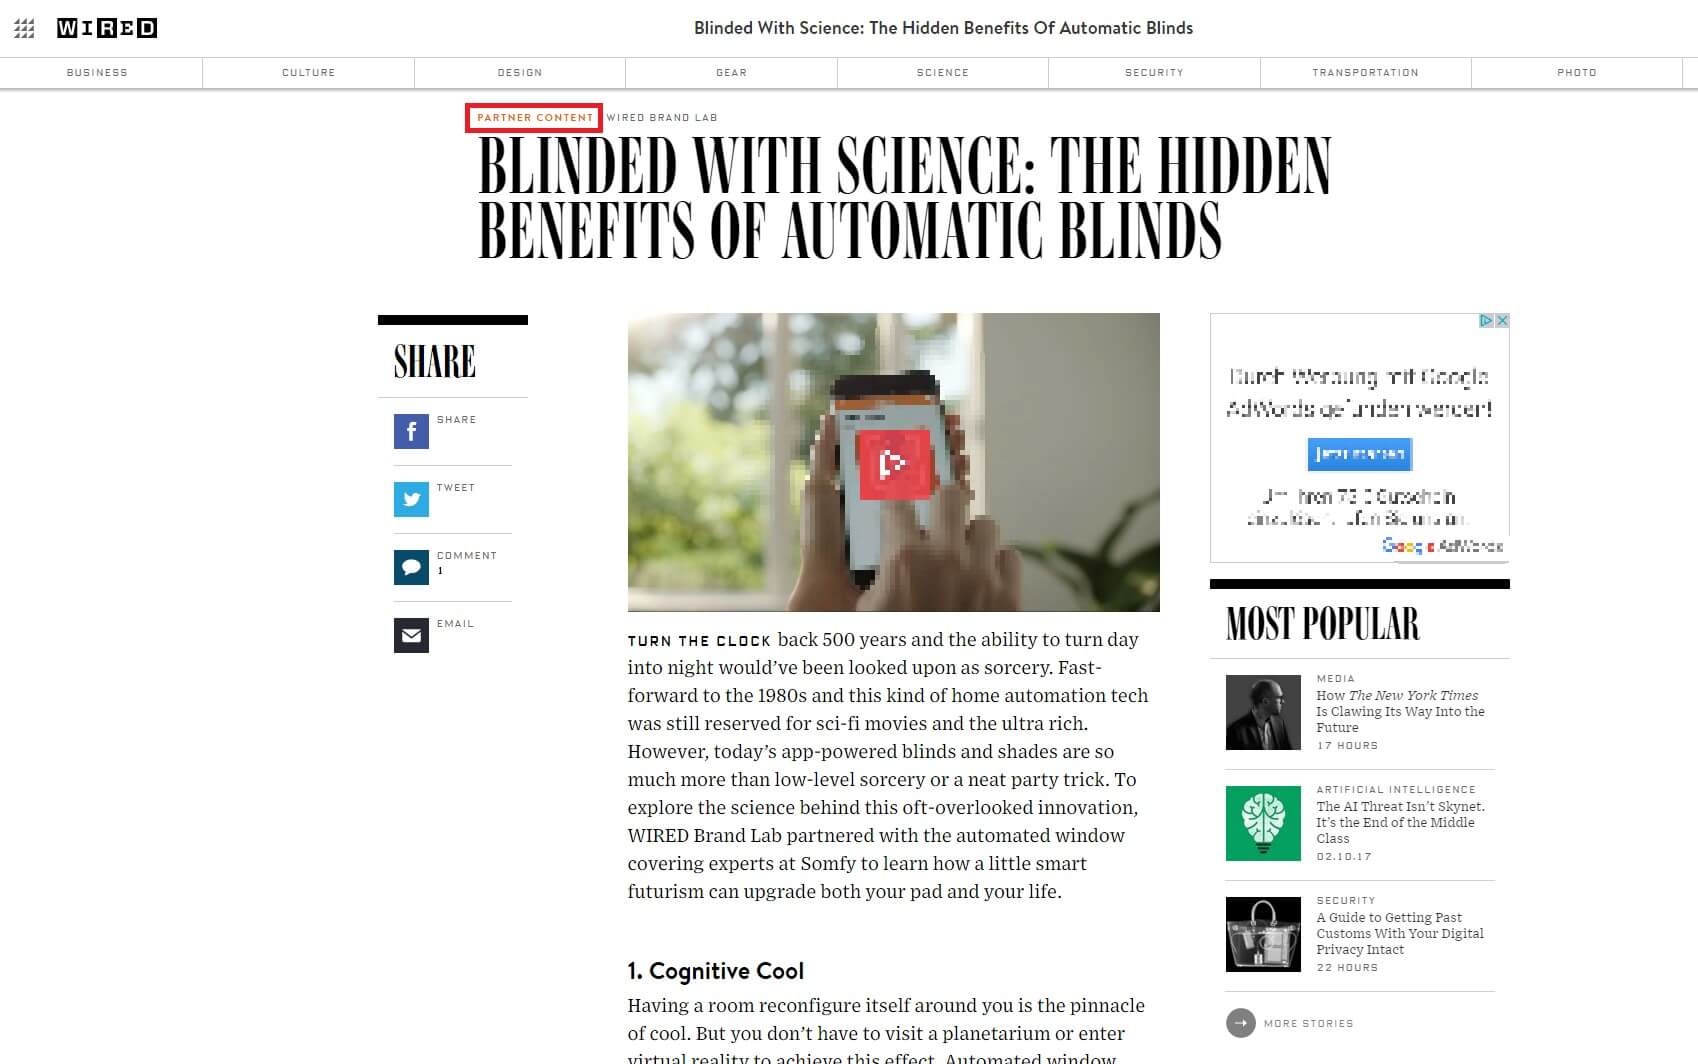 Screenshot of an advertorial on the online magazine Wired